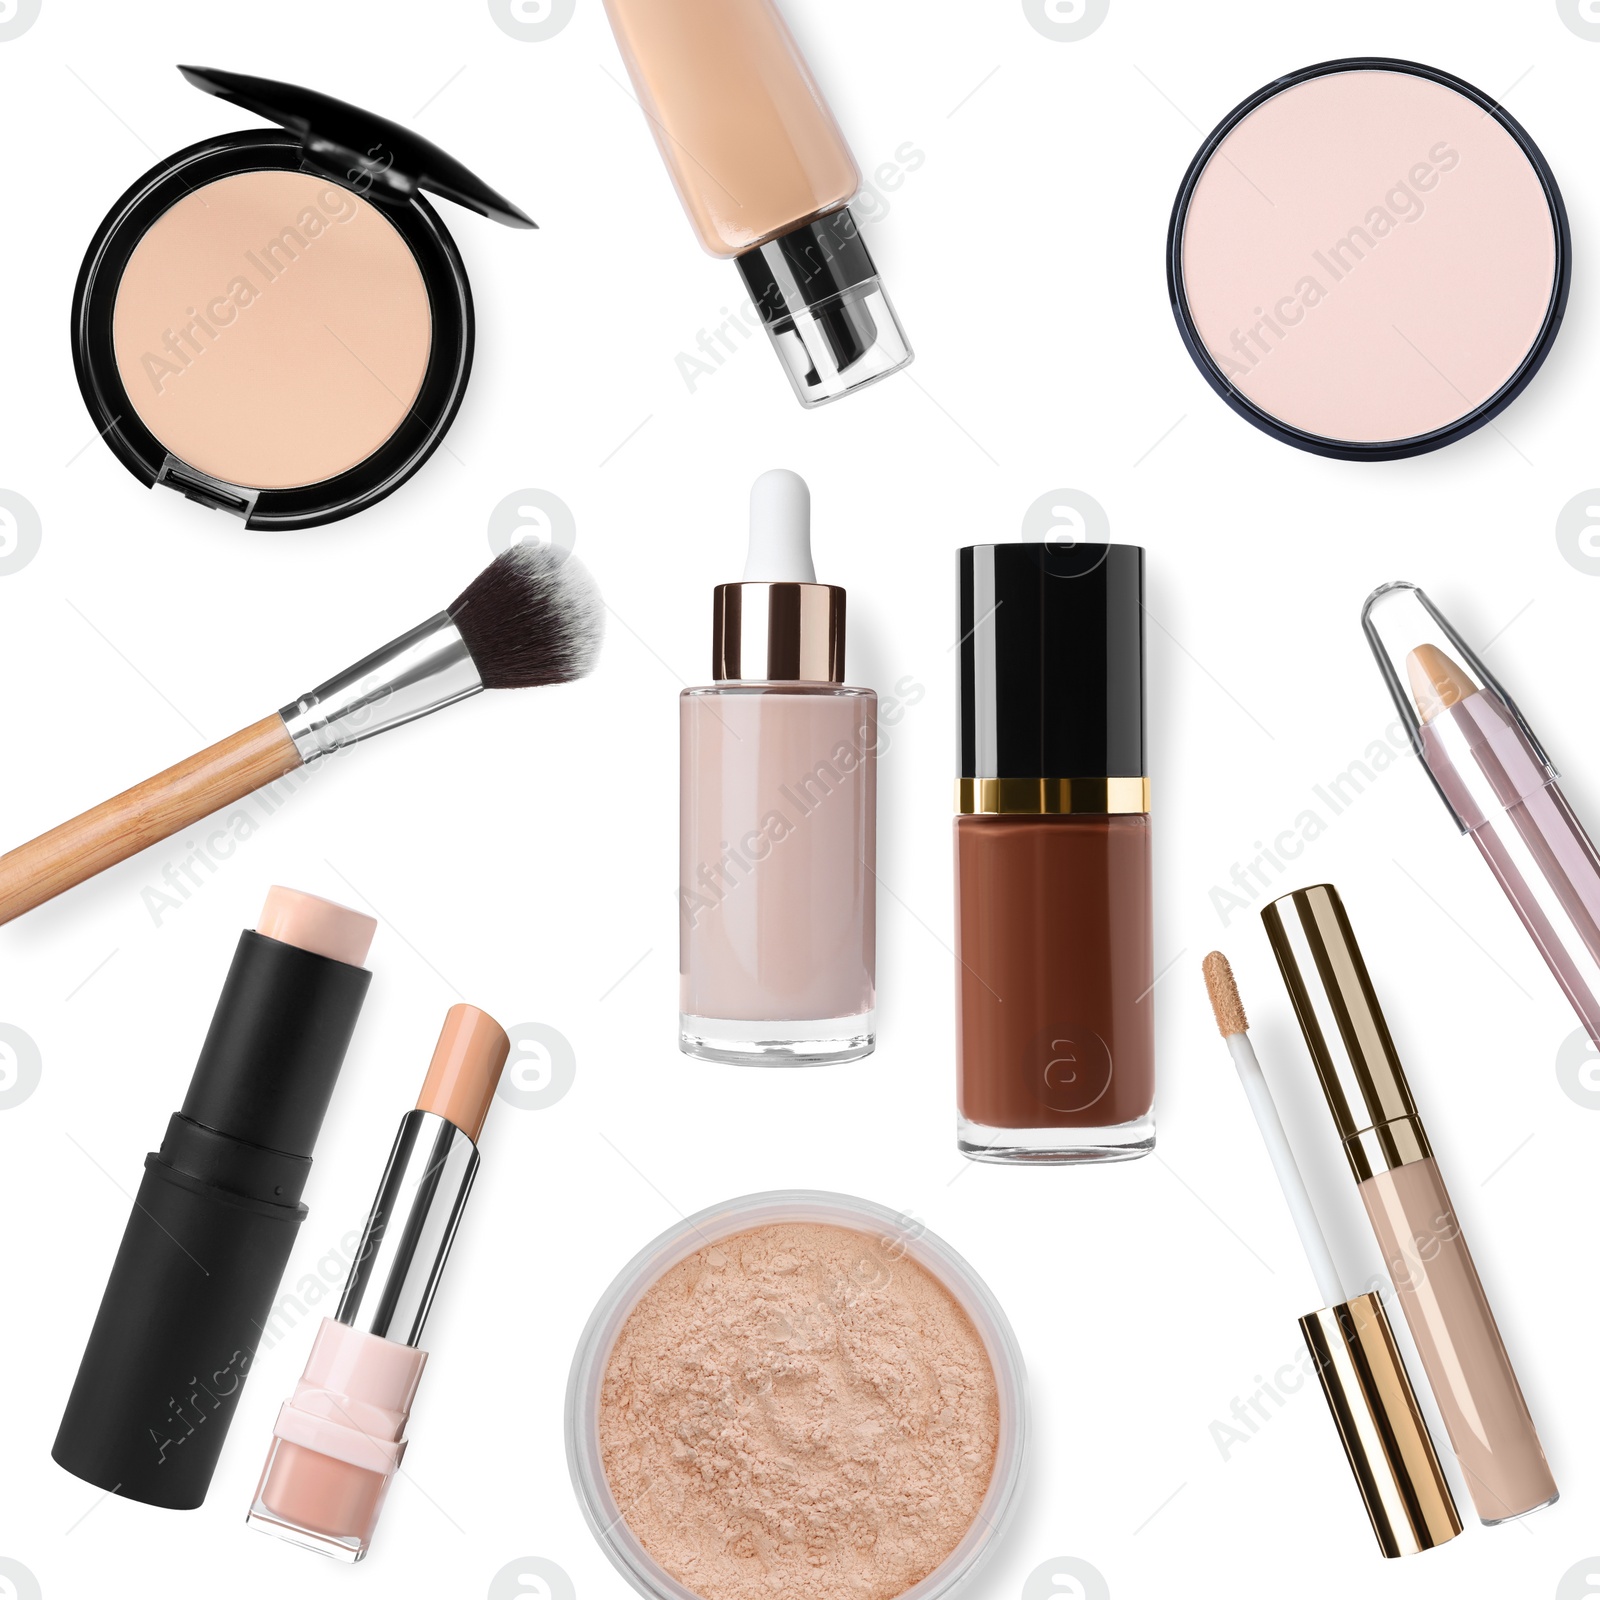 Image of Face powders, concealers, liquid foundations and brush isolated on white. Collectionmakeup products